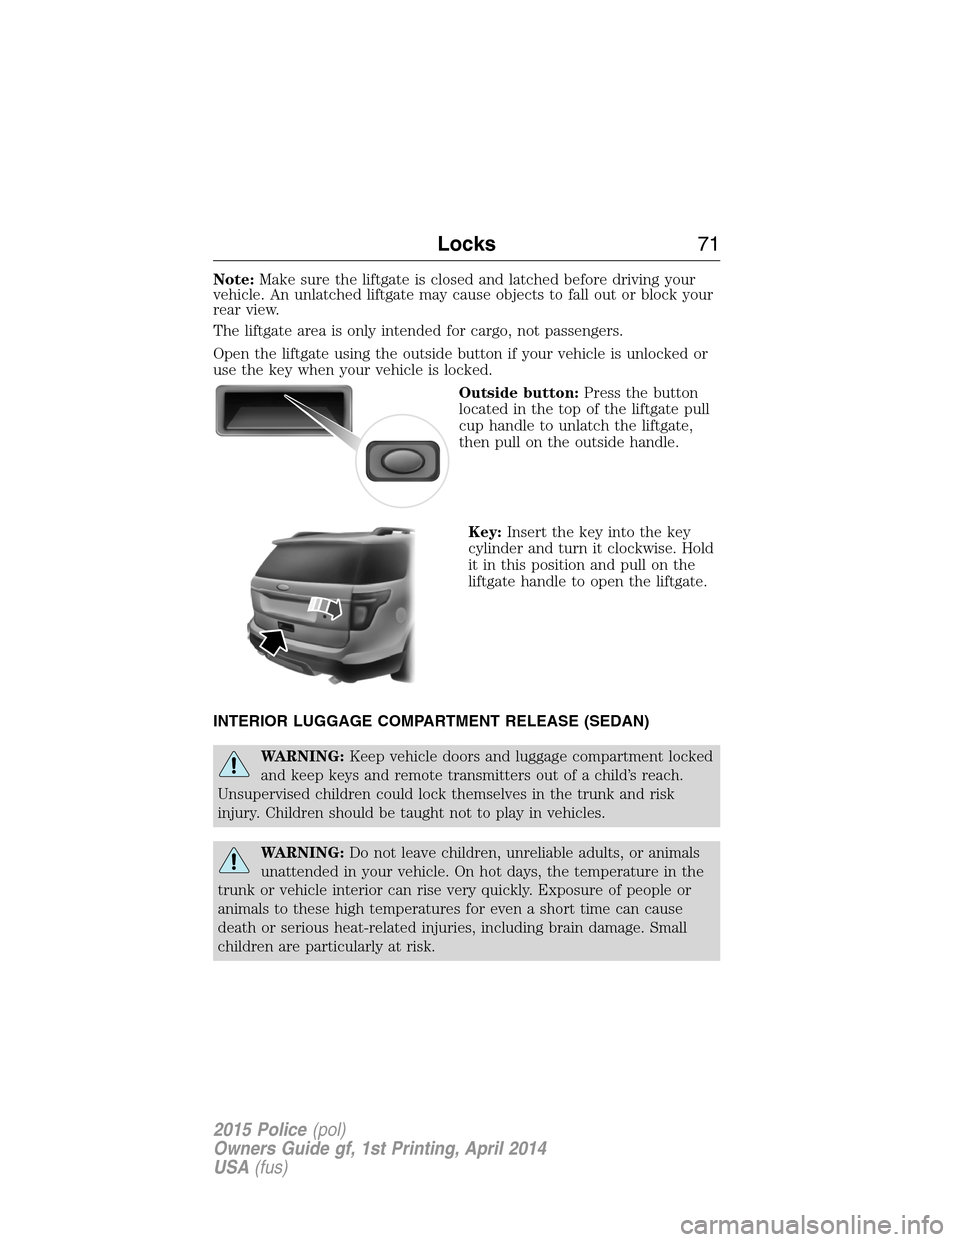 FORD POLICE INTERCEPTOR UTILITY 2015 1.G Manual PDF Note:Make sure the liftgate is closed and latched before driving your
vehicle. An unlatched liftgate may cause objects to fall out or block your
rear view.
The liftgate area is only intended for cargo